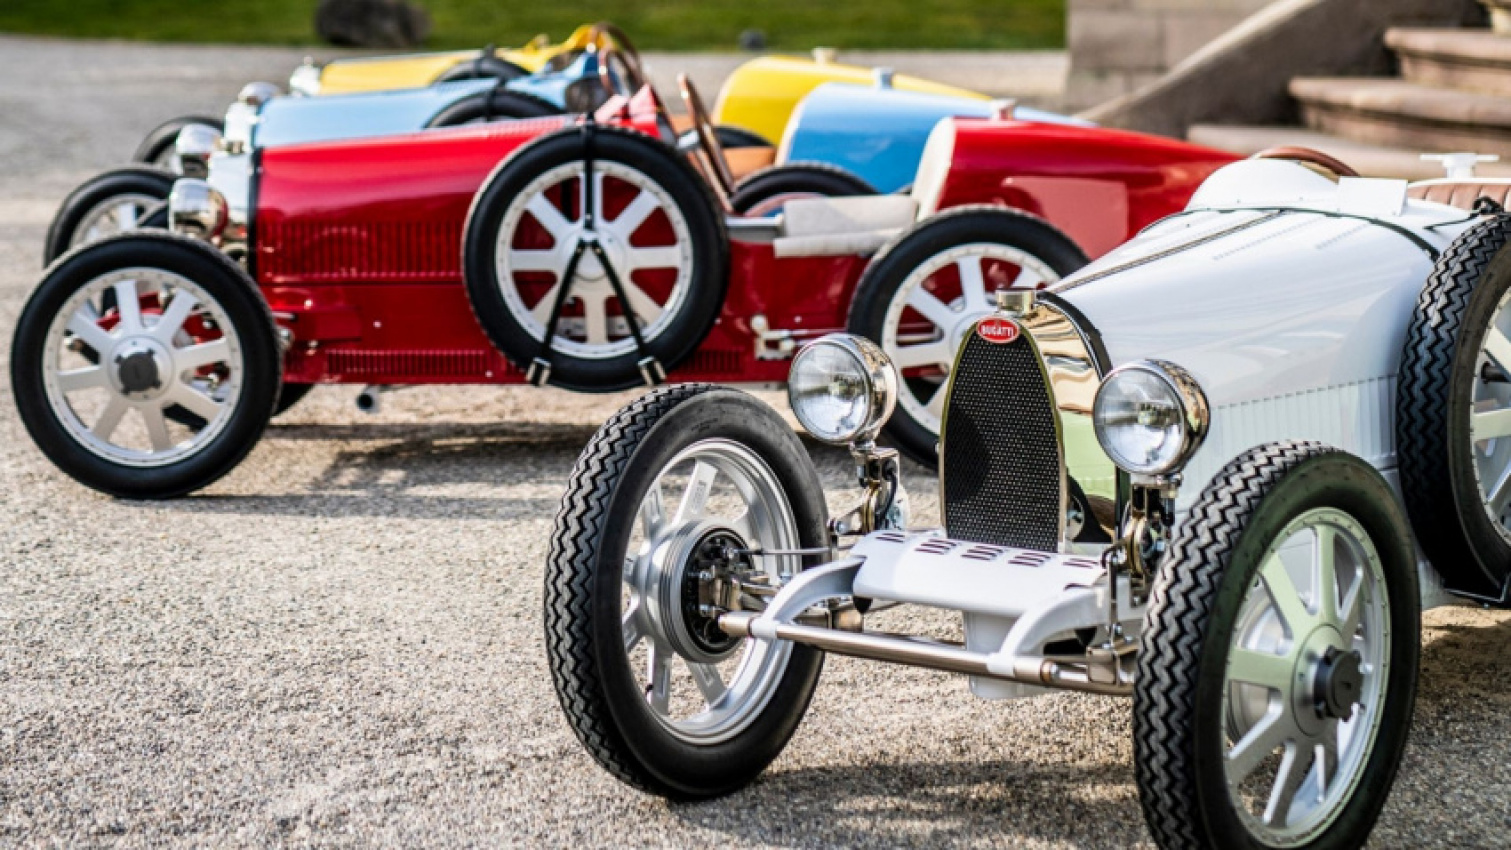 autos, bugatti, cars, aciclassic, american, asian, celebrity, classic, client, europe, exotic, features, handpicked, luxury, modern classic, muscle, news, newsletter, off-road, sports, trucks, a father bought bugattis for each of his six kids